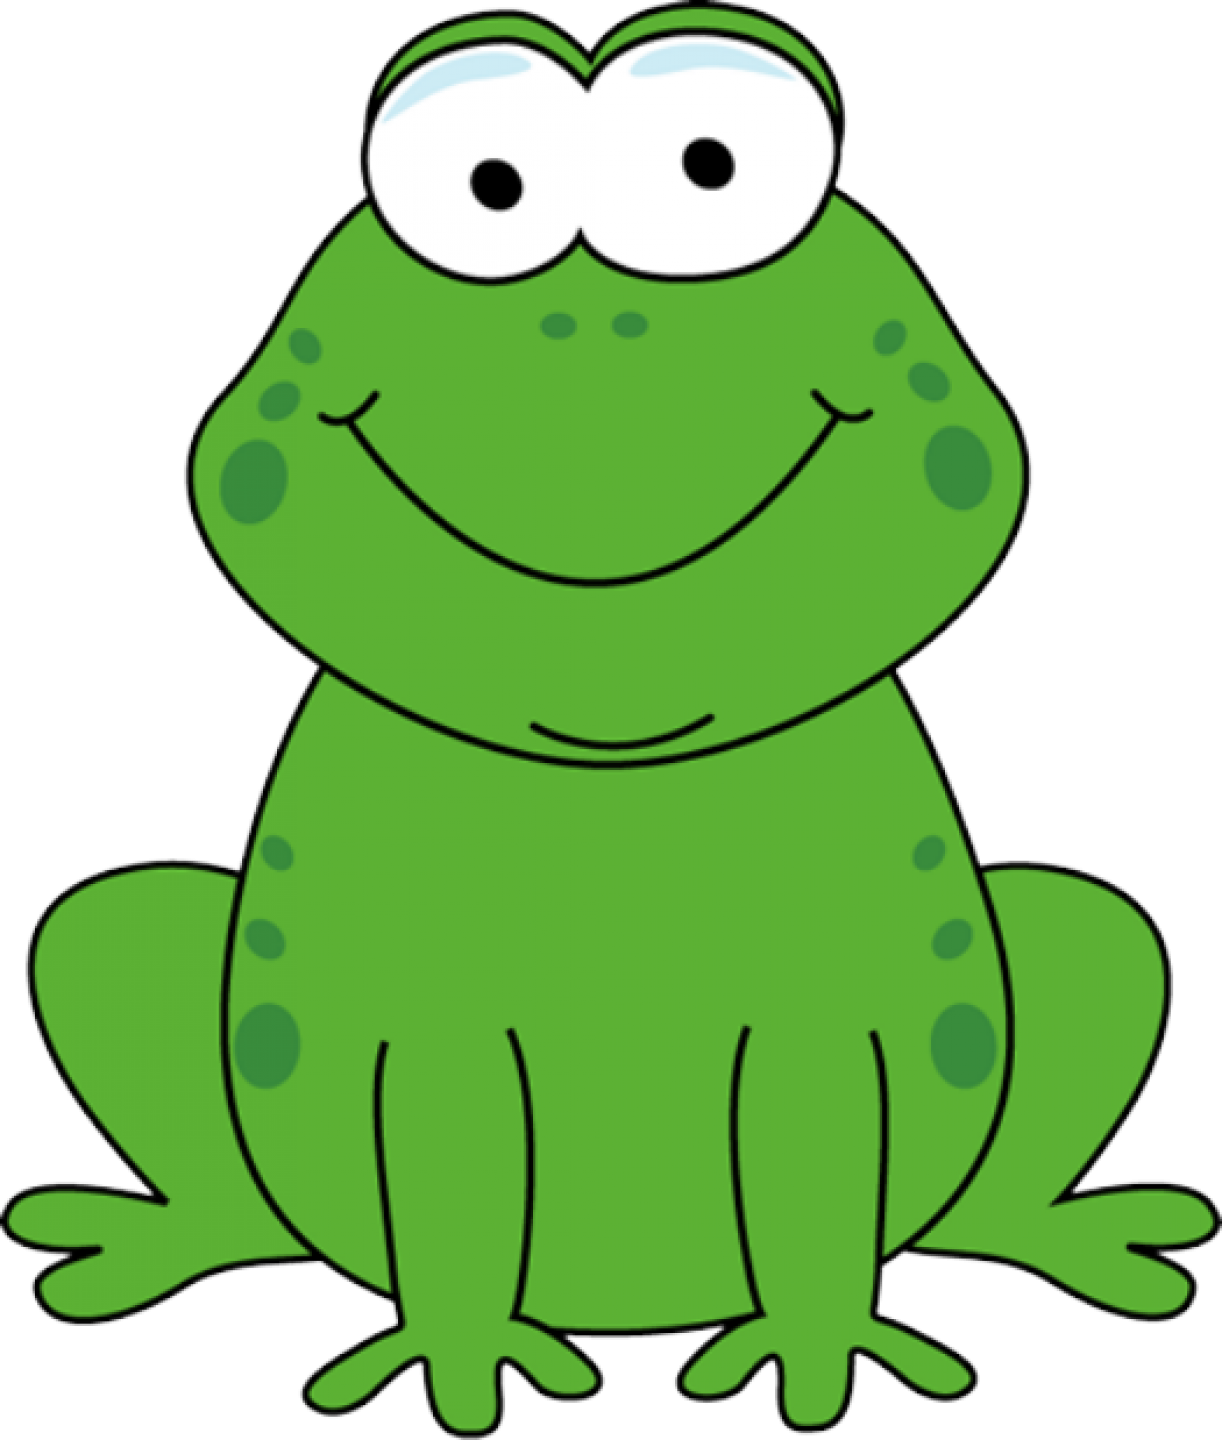 Toad clipart clip art. The frog prince legs